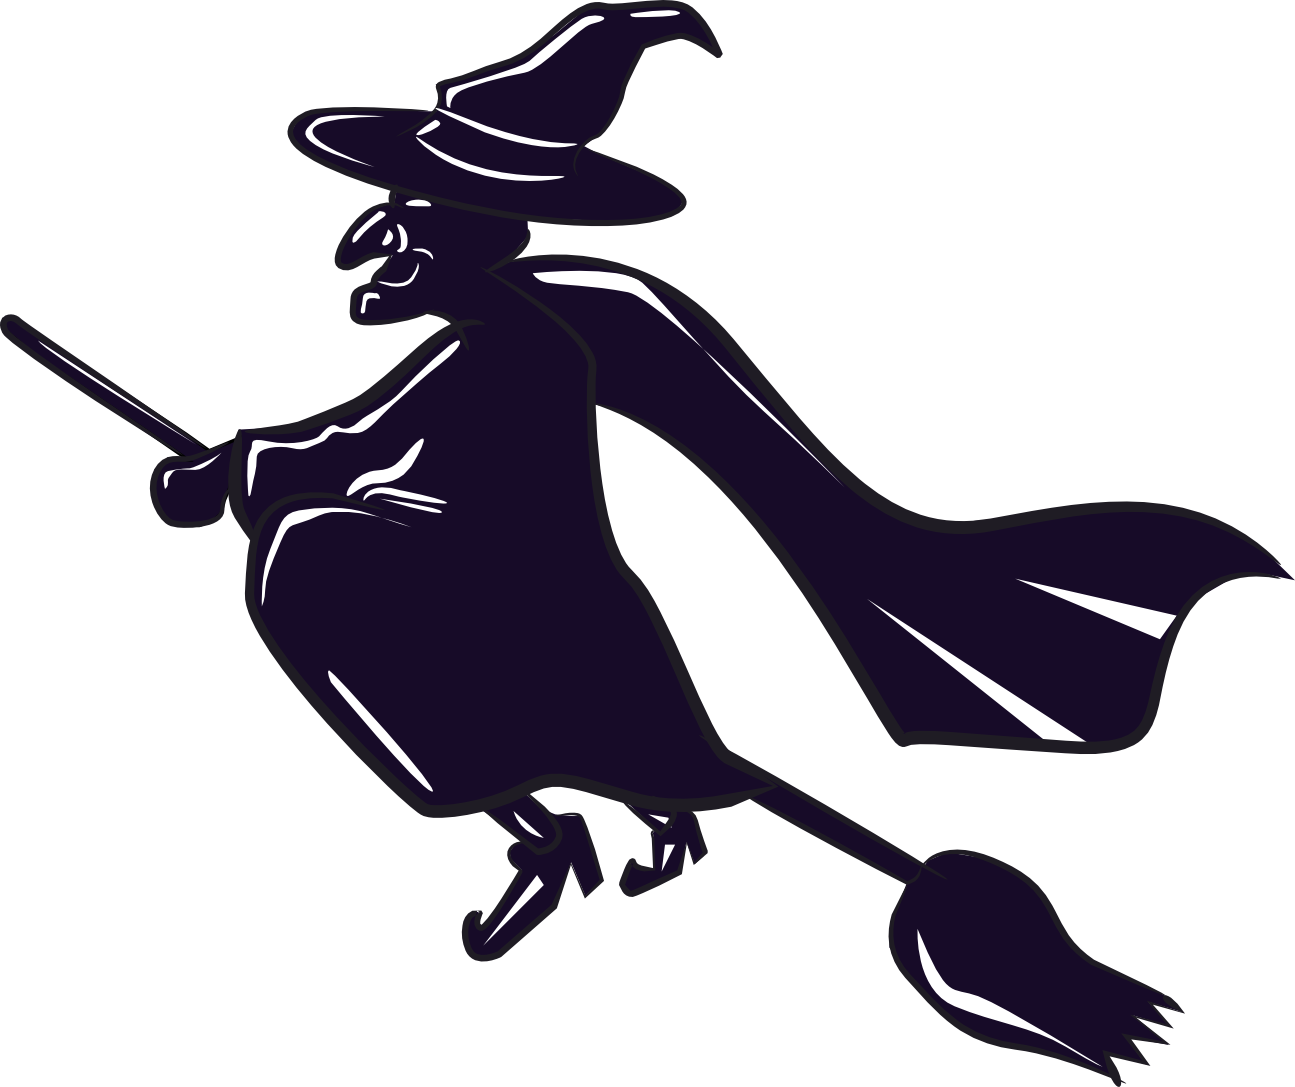 The Totally Free Clip Art Blog: Season - [Halloween] Witch on broom